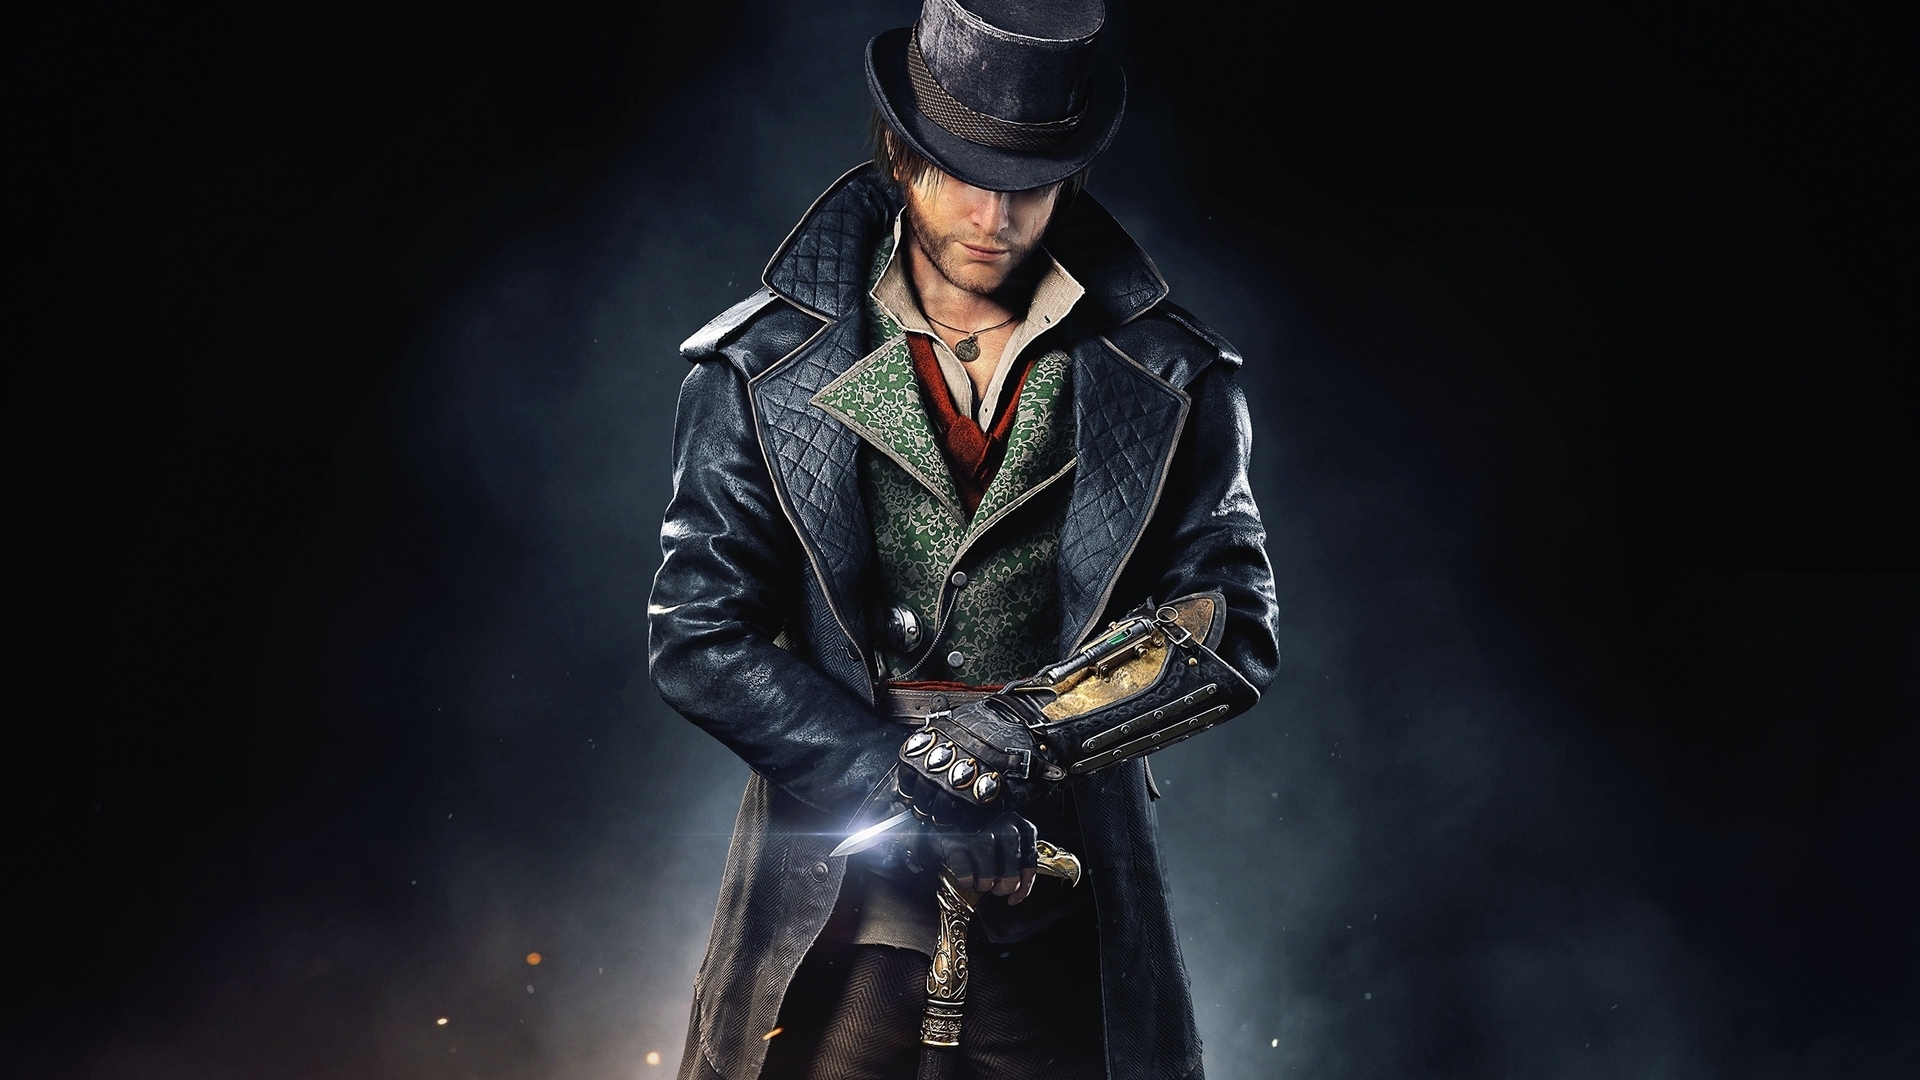 Assassins Creed Syndicate for 1920 x 1080 HDTV 1080p resolution